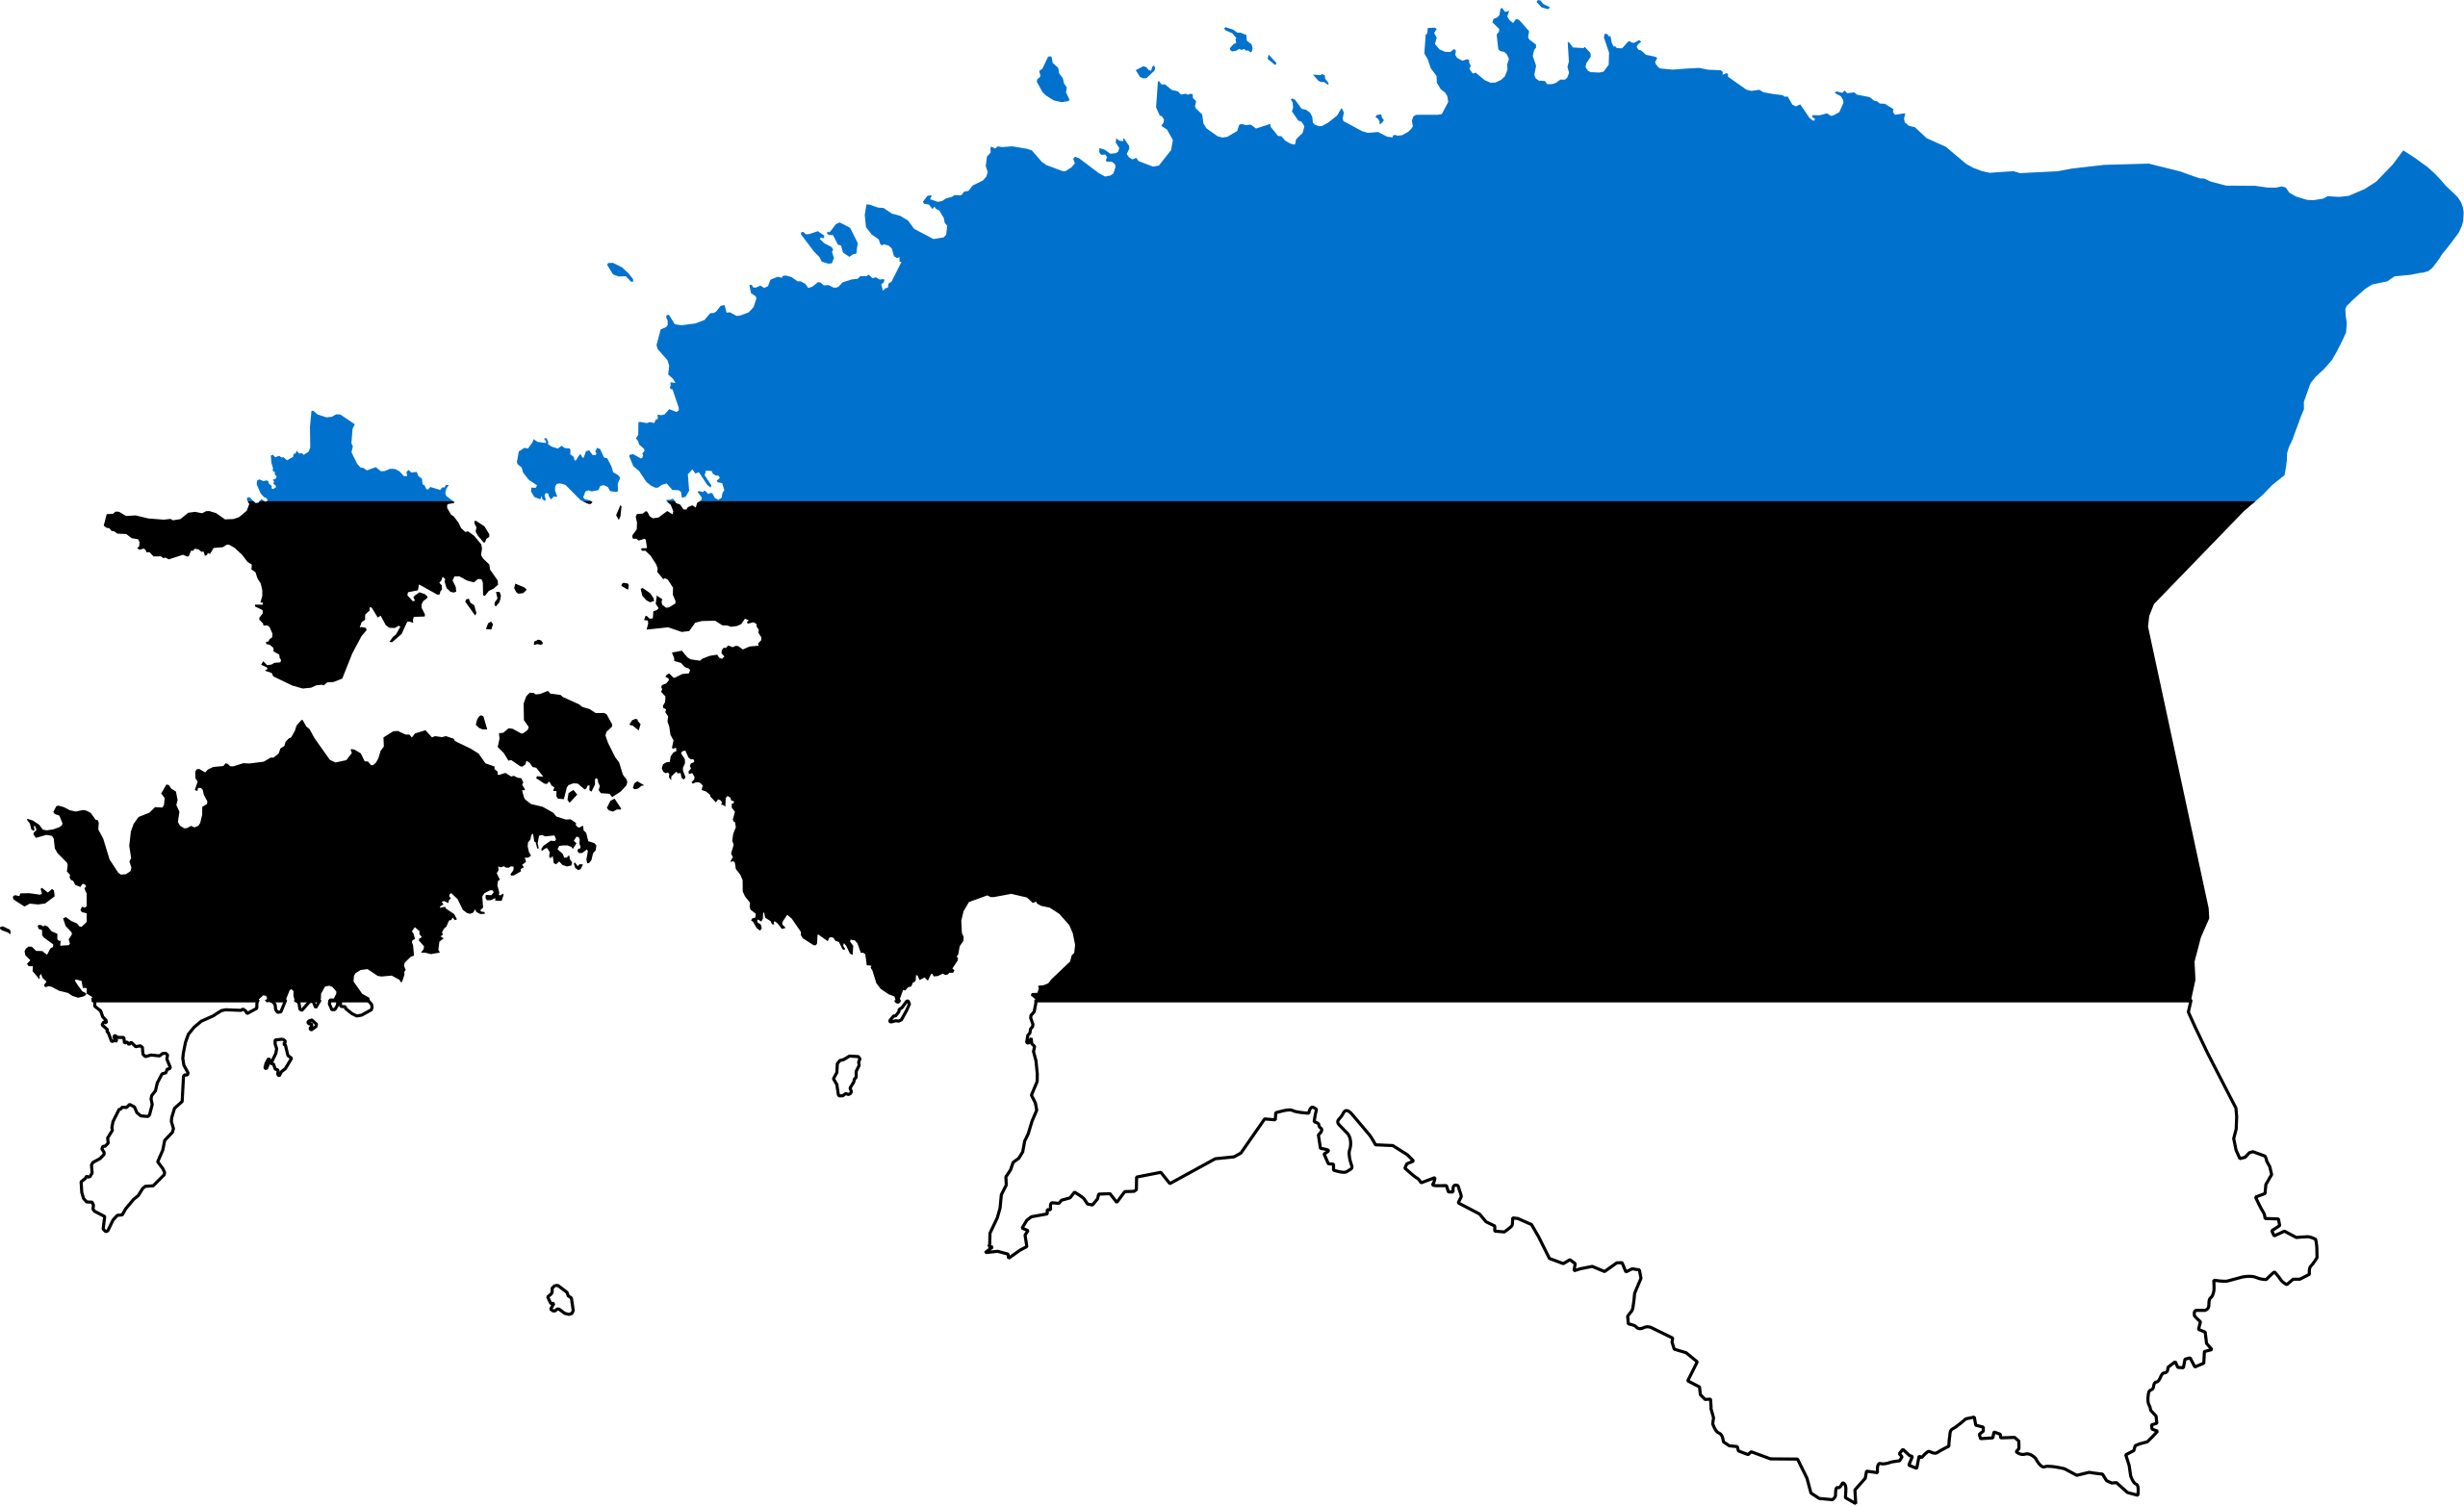 How Far is Estonia from Universal Health Coverage? A research paper